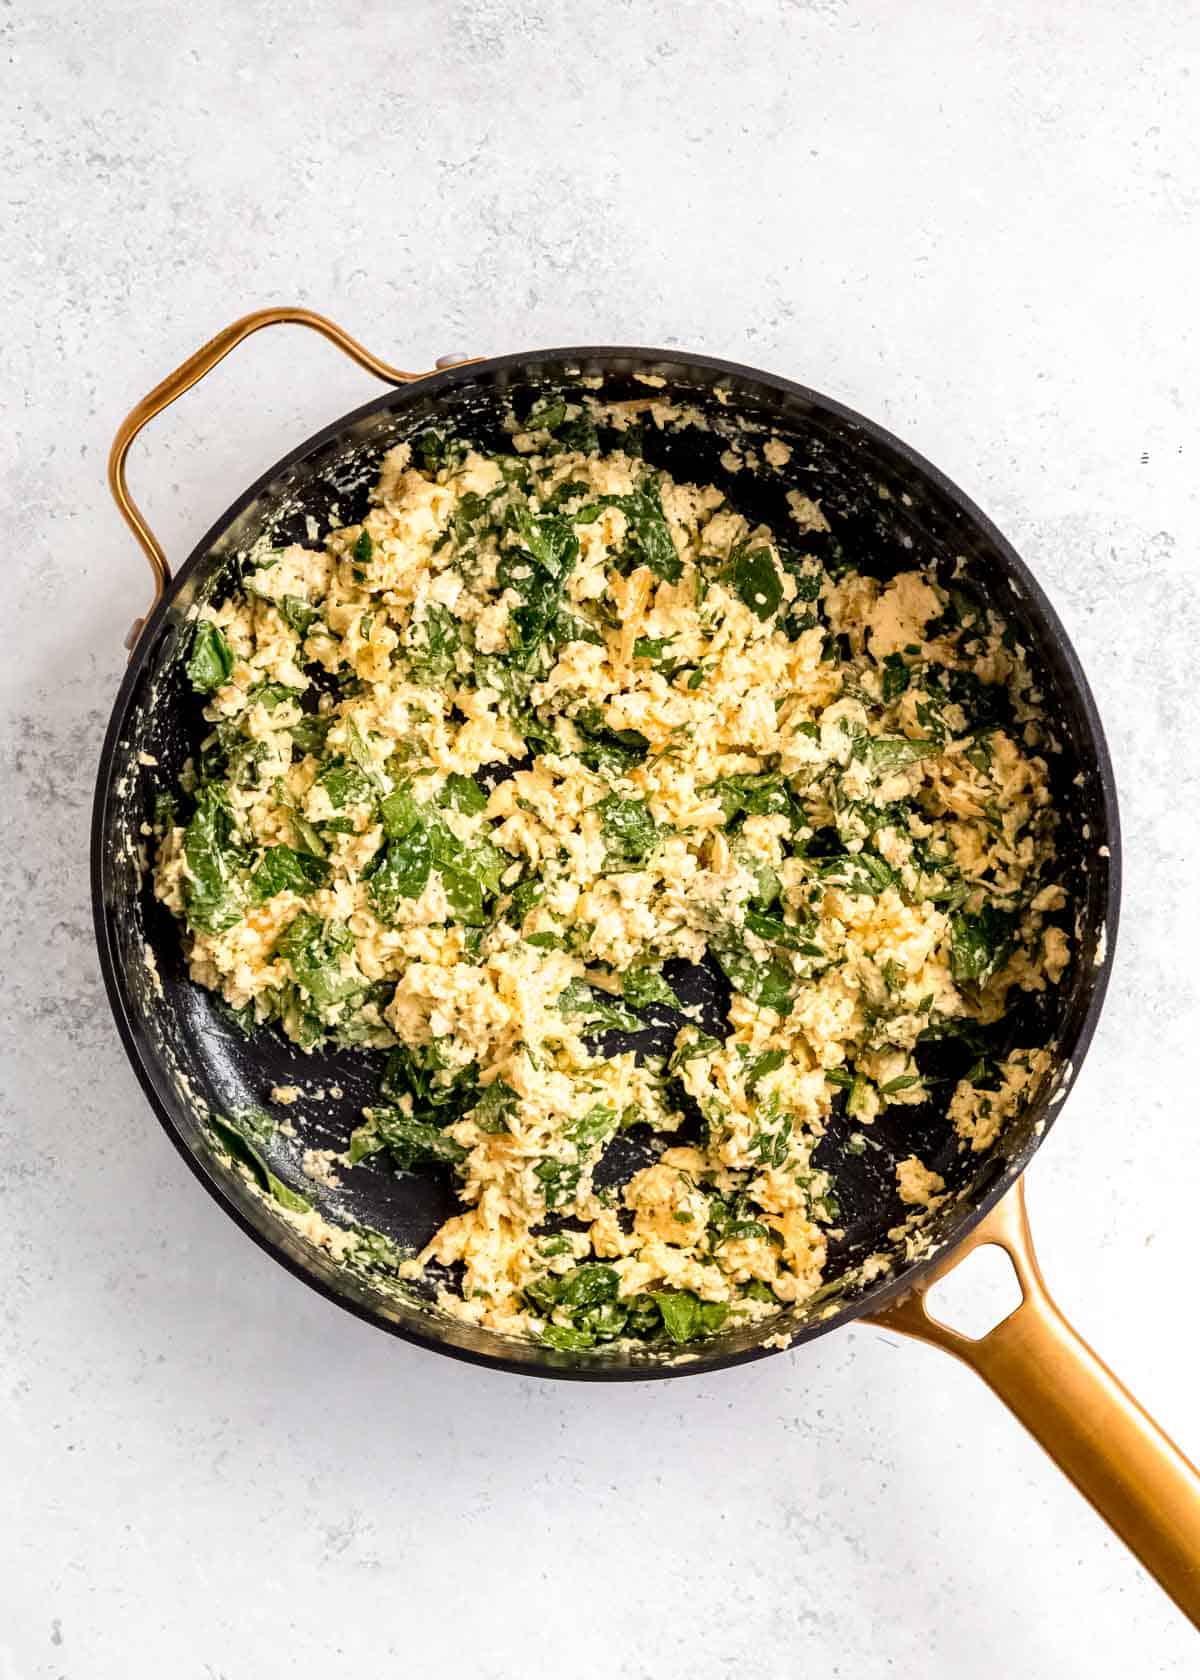 melted cheese over scrambled eggs and spinach